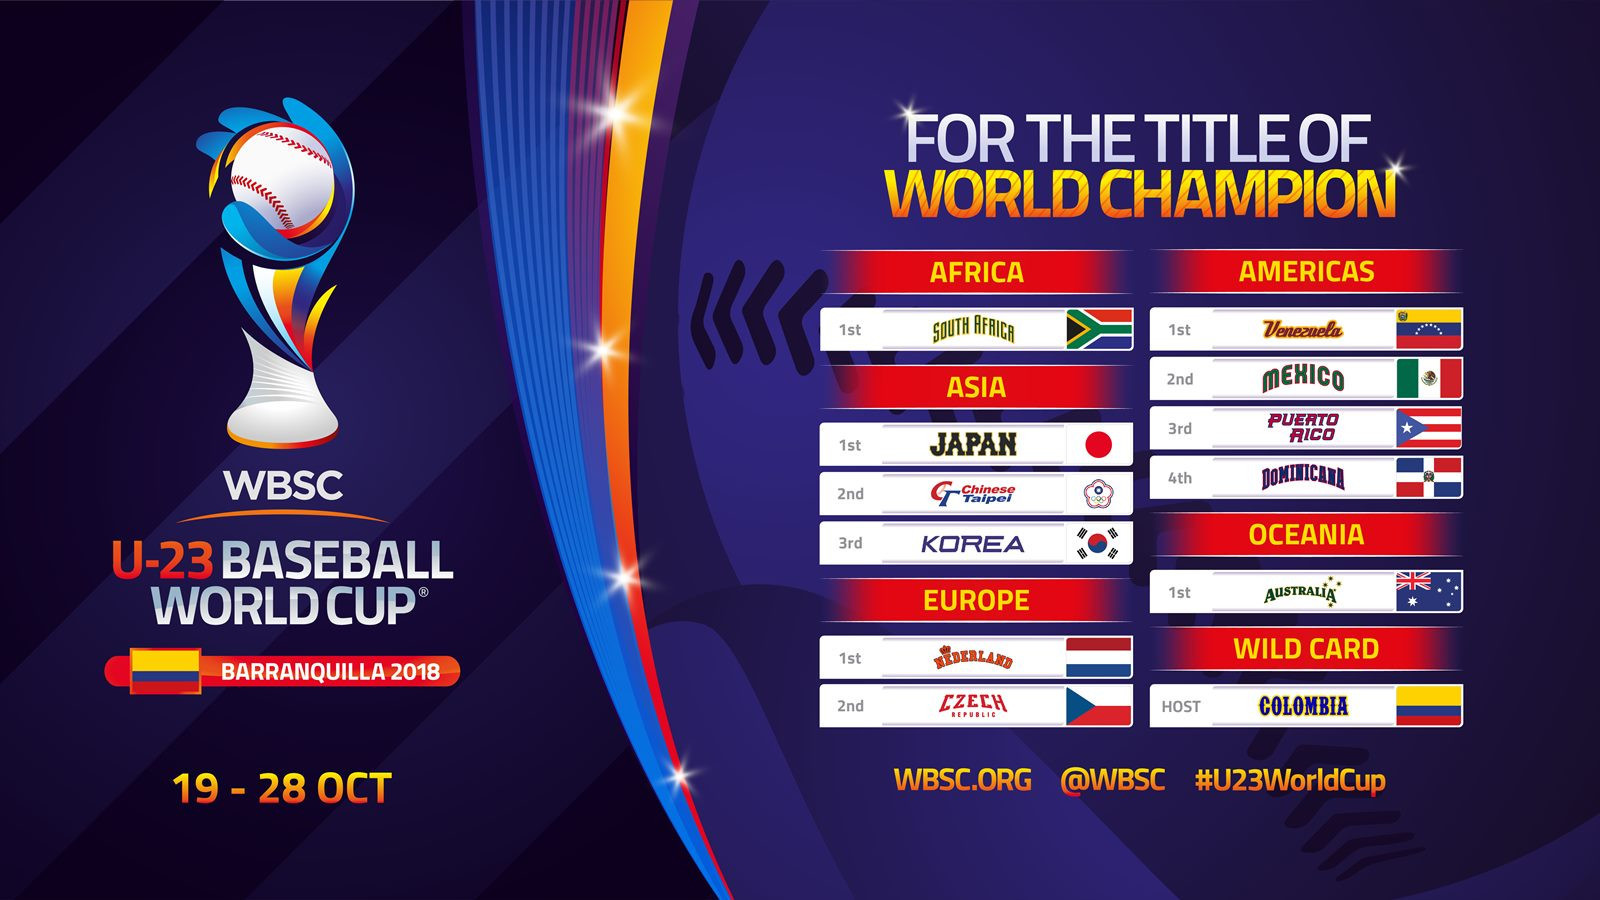 As the new hosts, Colombia have been given a wildcard into the competition to compete against 11 of the best baseball nations in the world ©WBSC